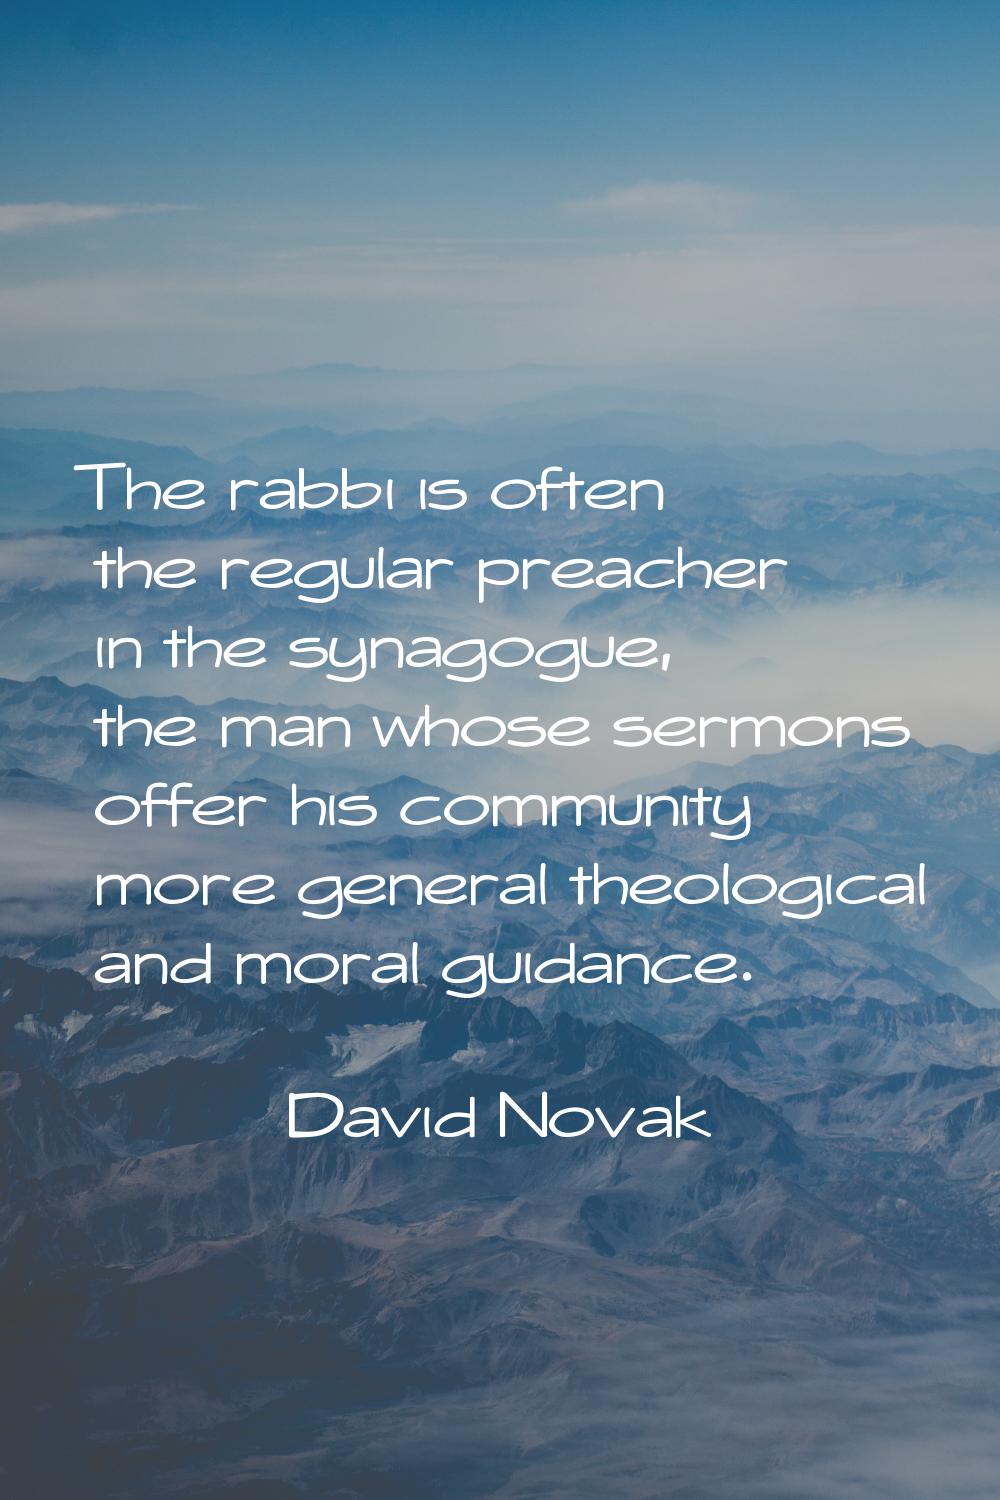 The rabbi is often the regular preacher in the synagogue, the man whose sermons offer his community